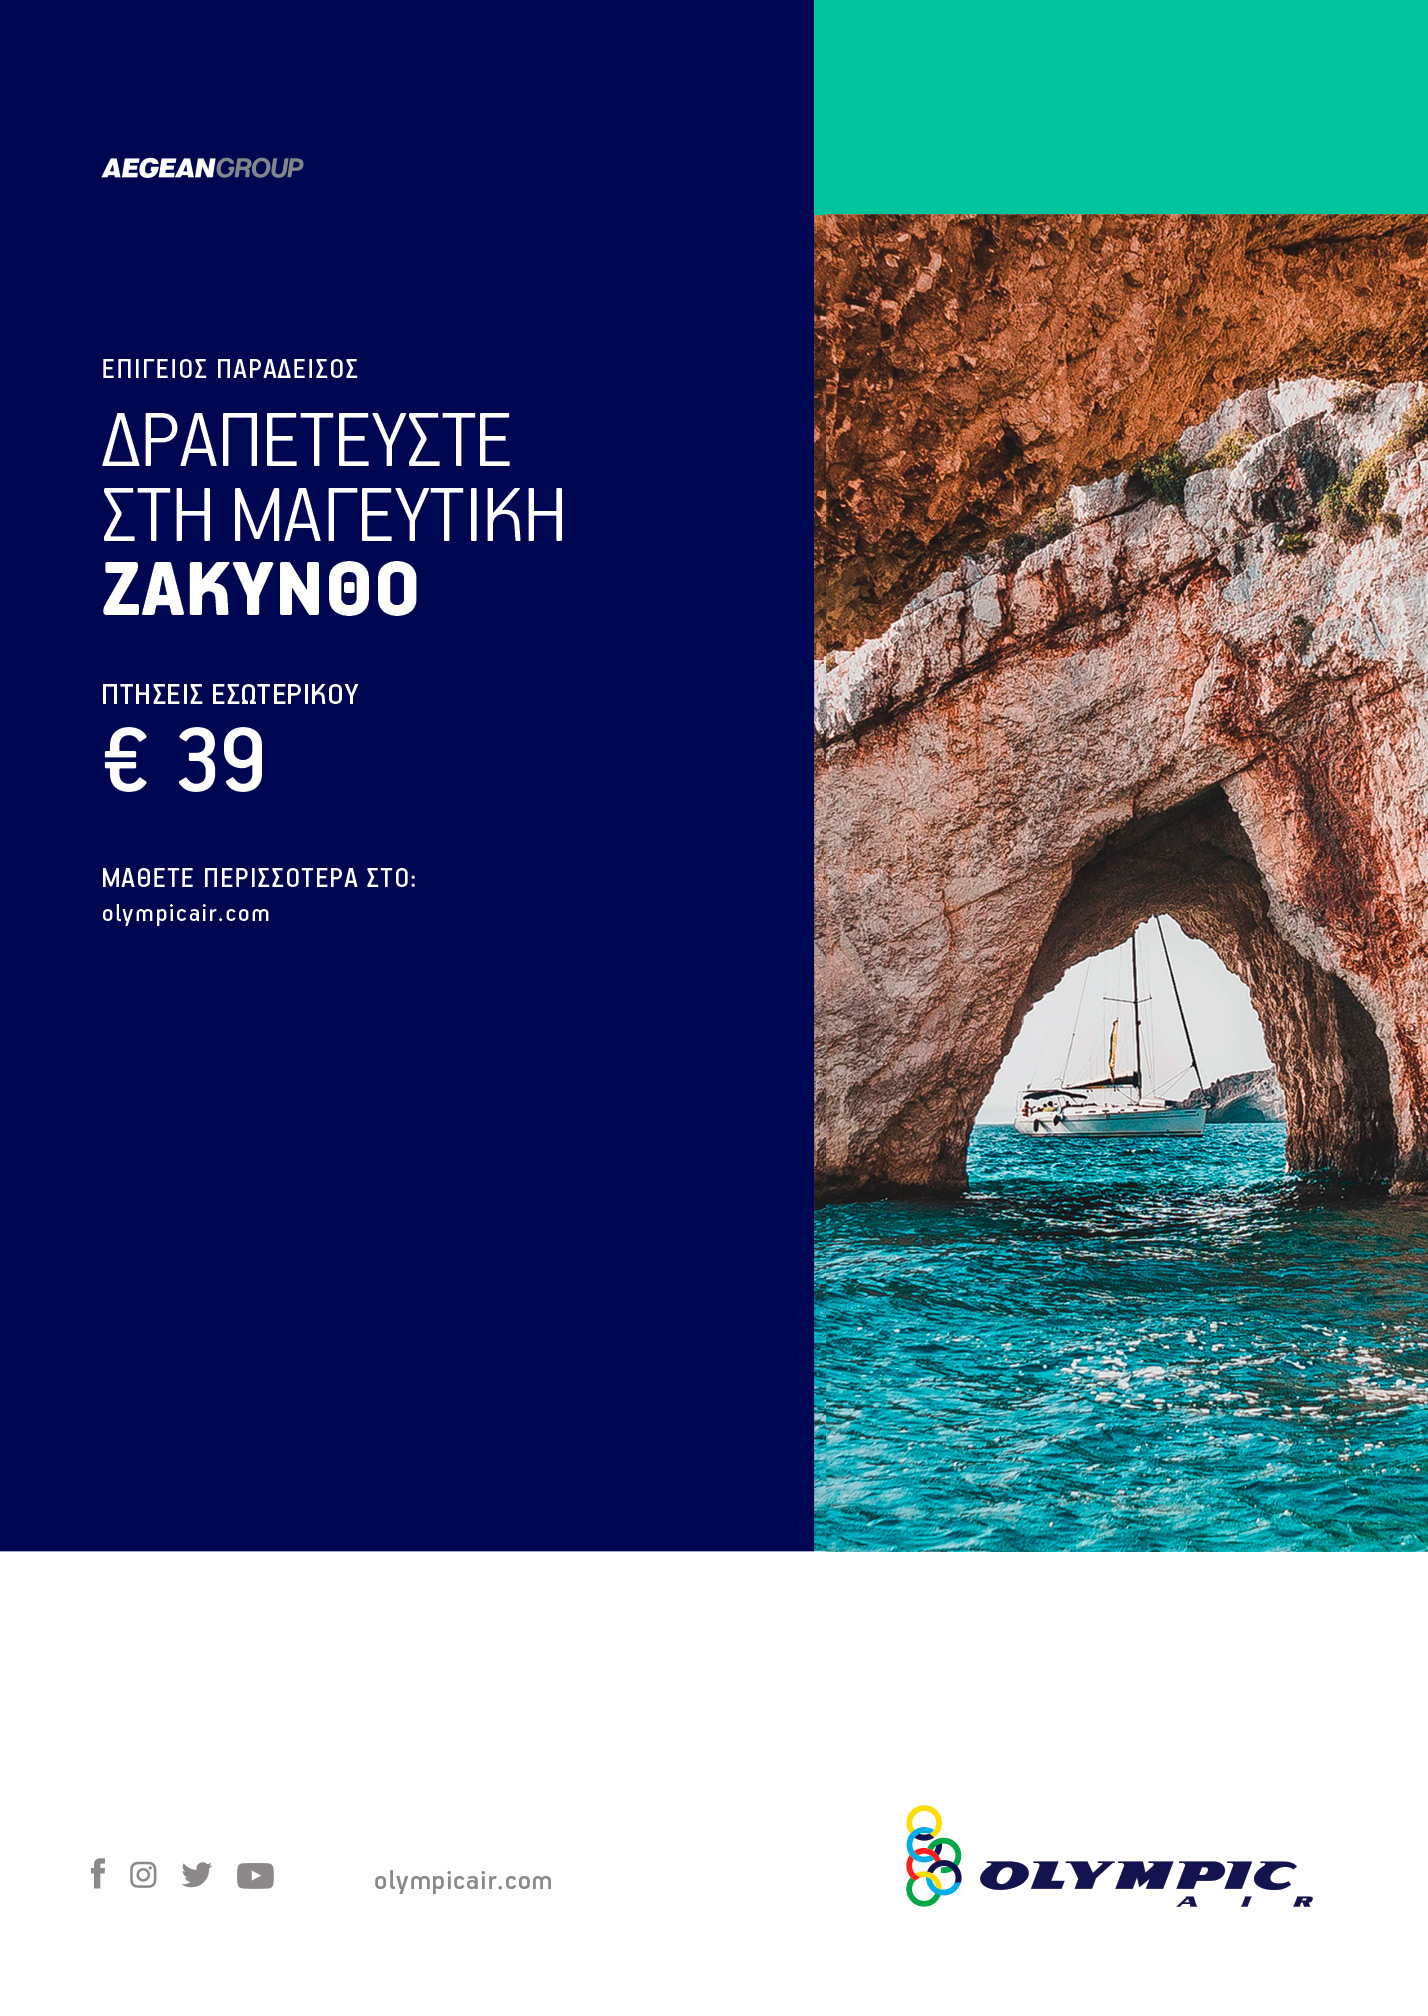 aegean air branding olympic air A4 ad kommigraphics